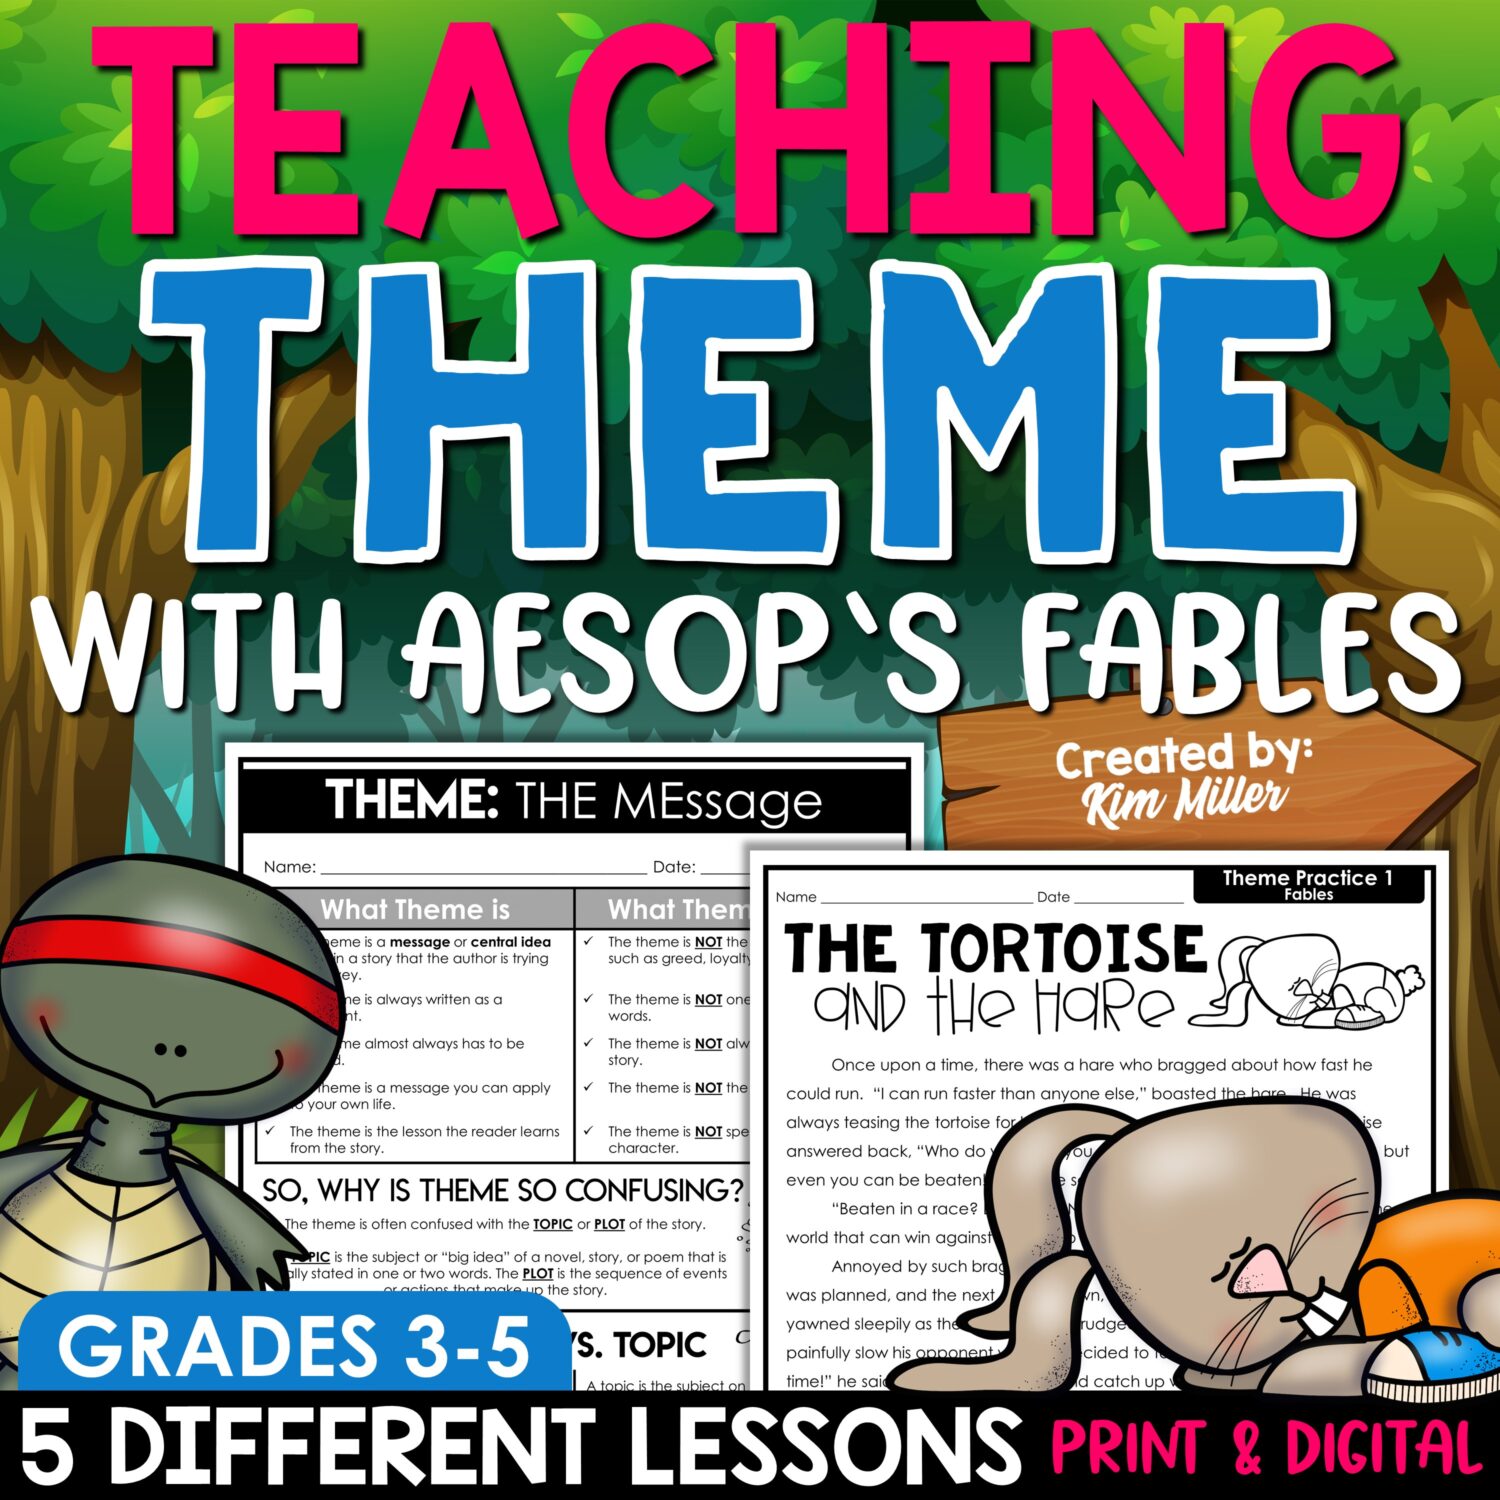 Teaching Theme with Aesop's Fables